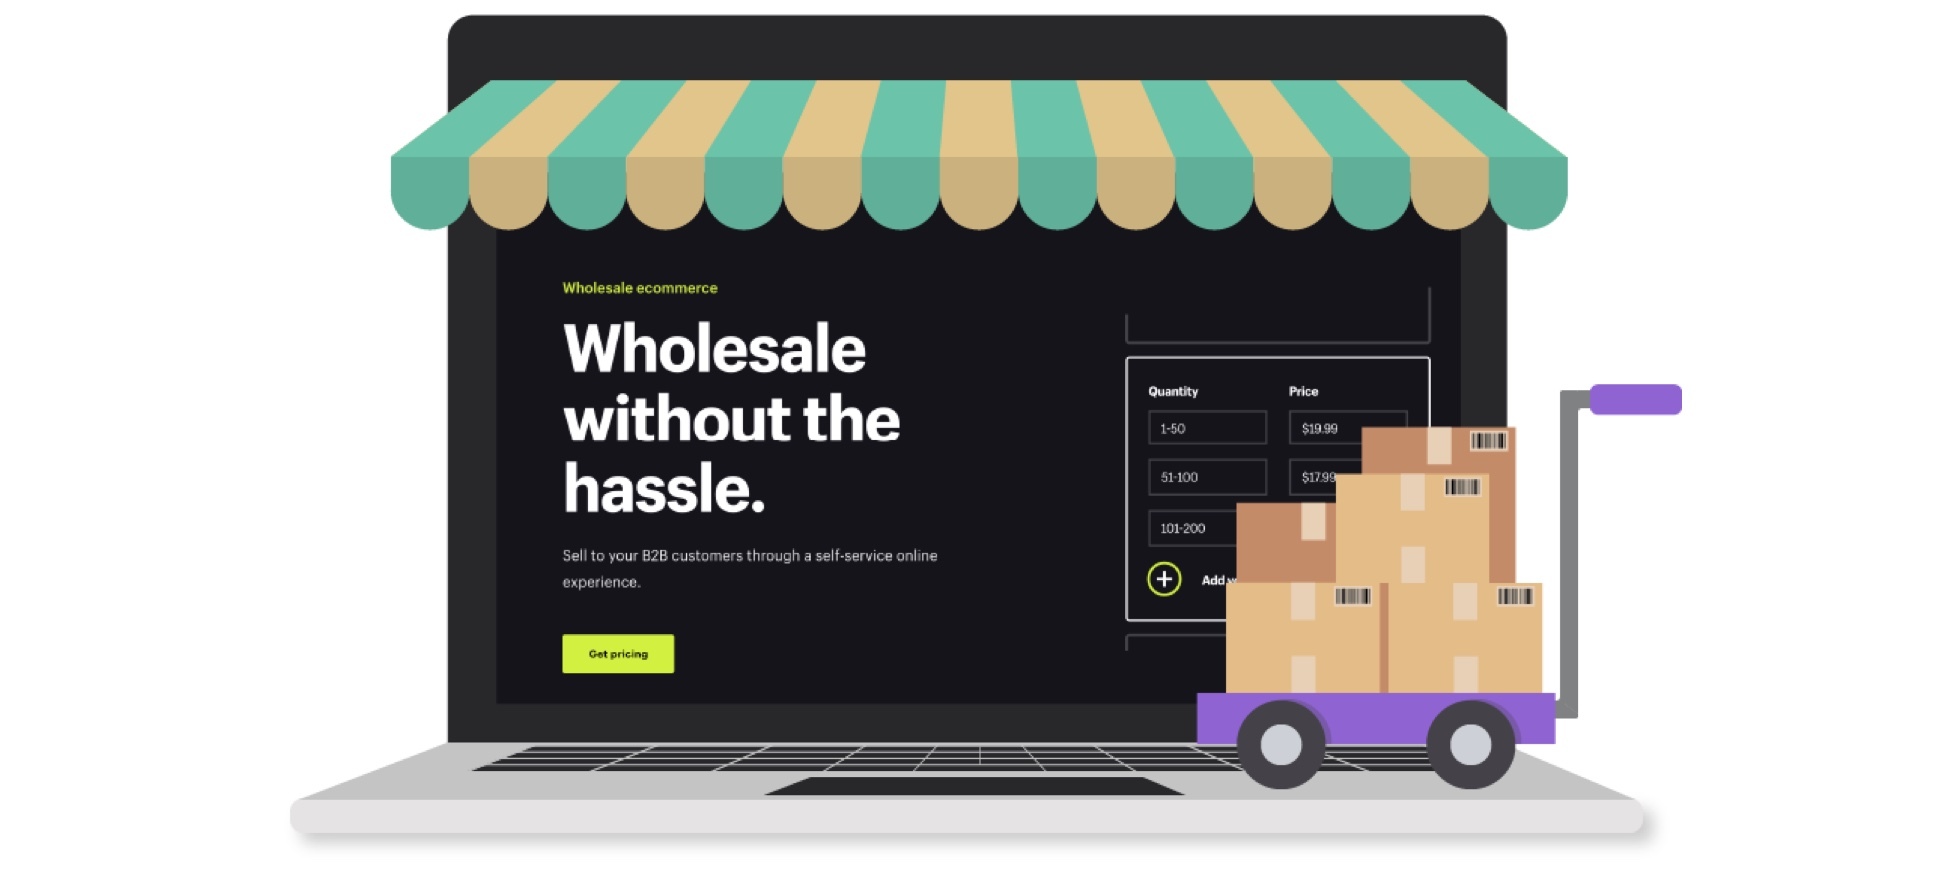 How To Find Wholesalers & Wholesale Vendors